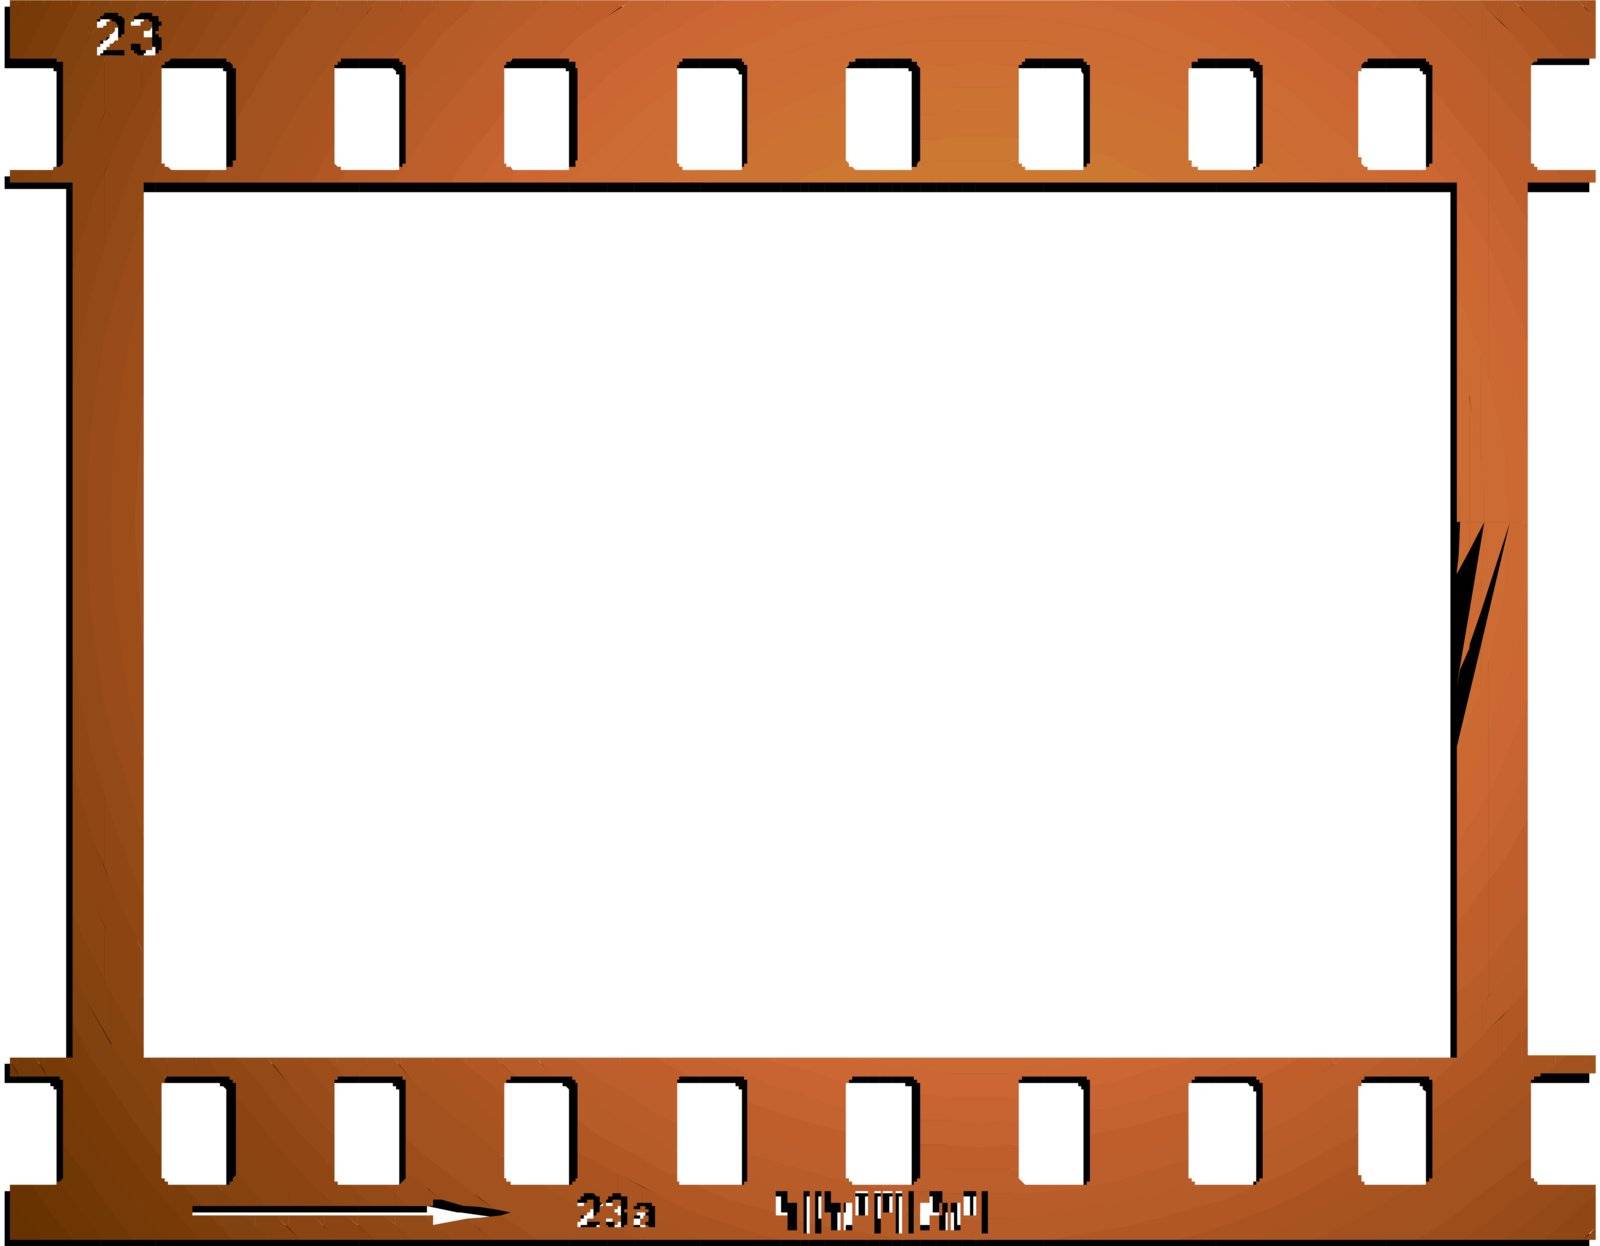 Frames of photographic film